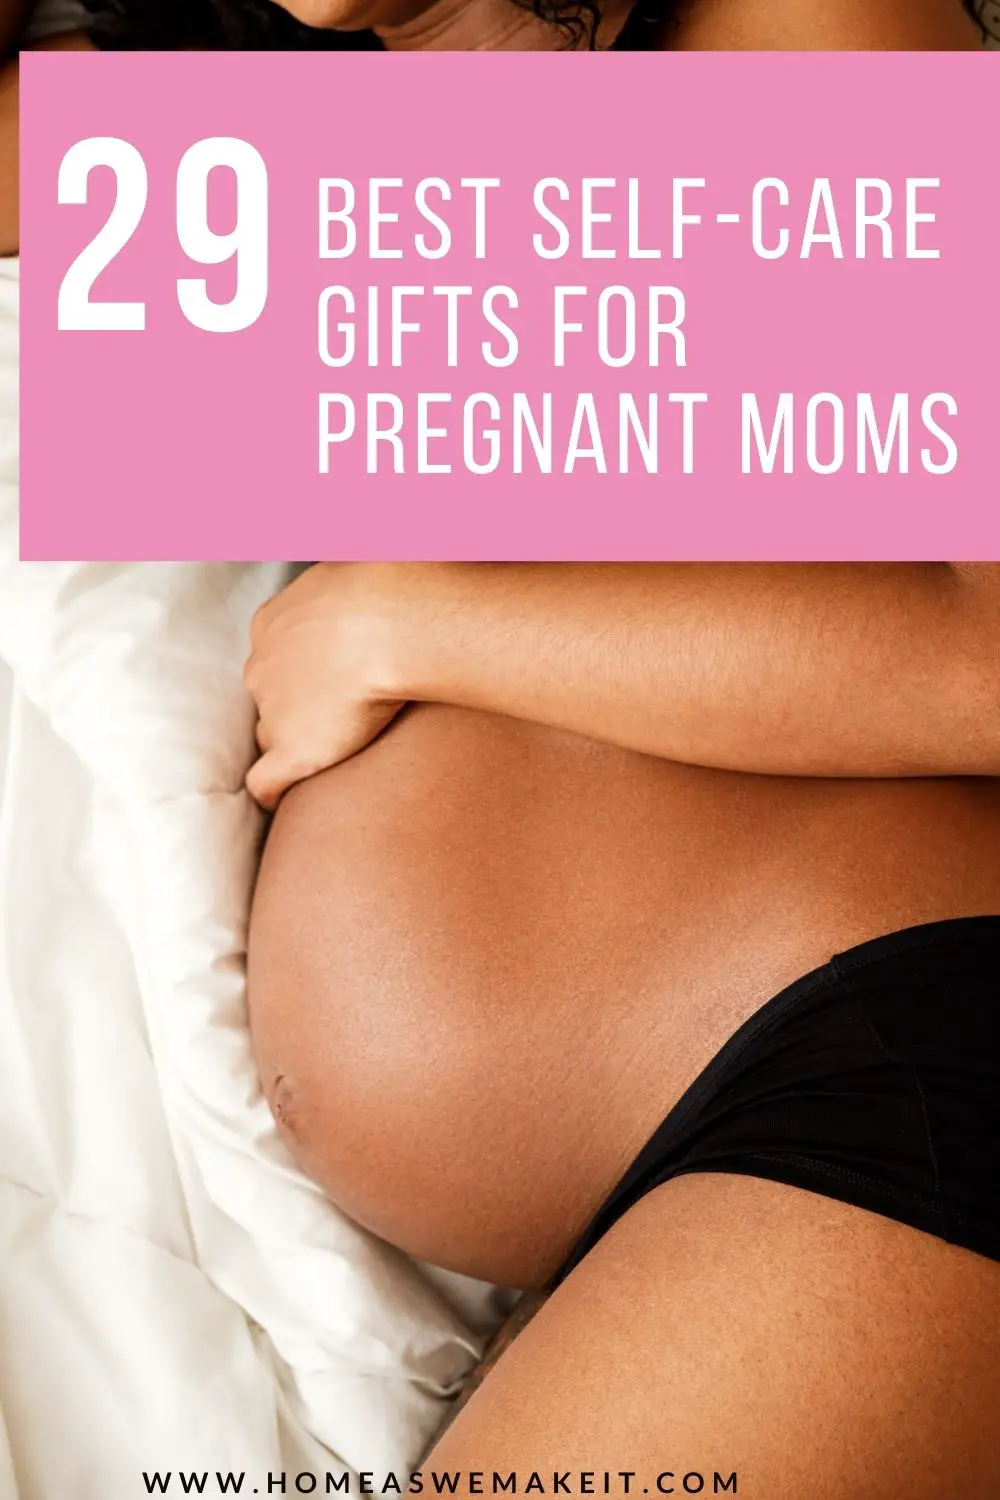 29 Best Self-Care Gifts for Pregnant Moms